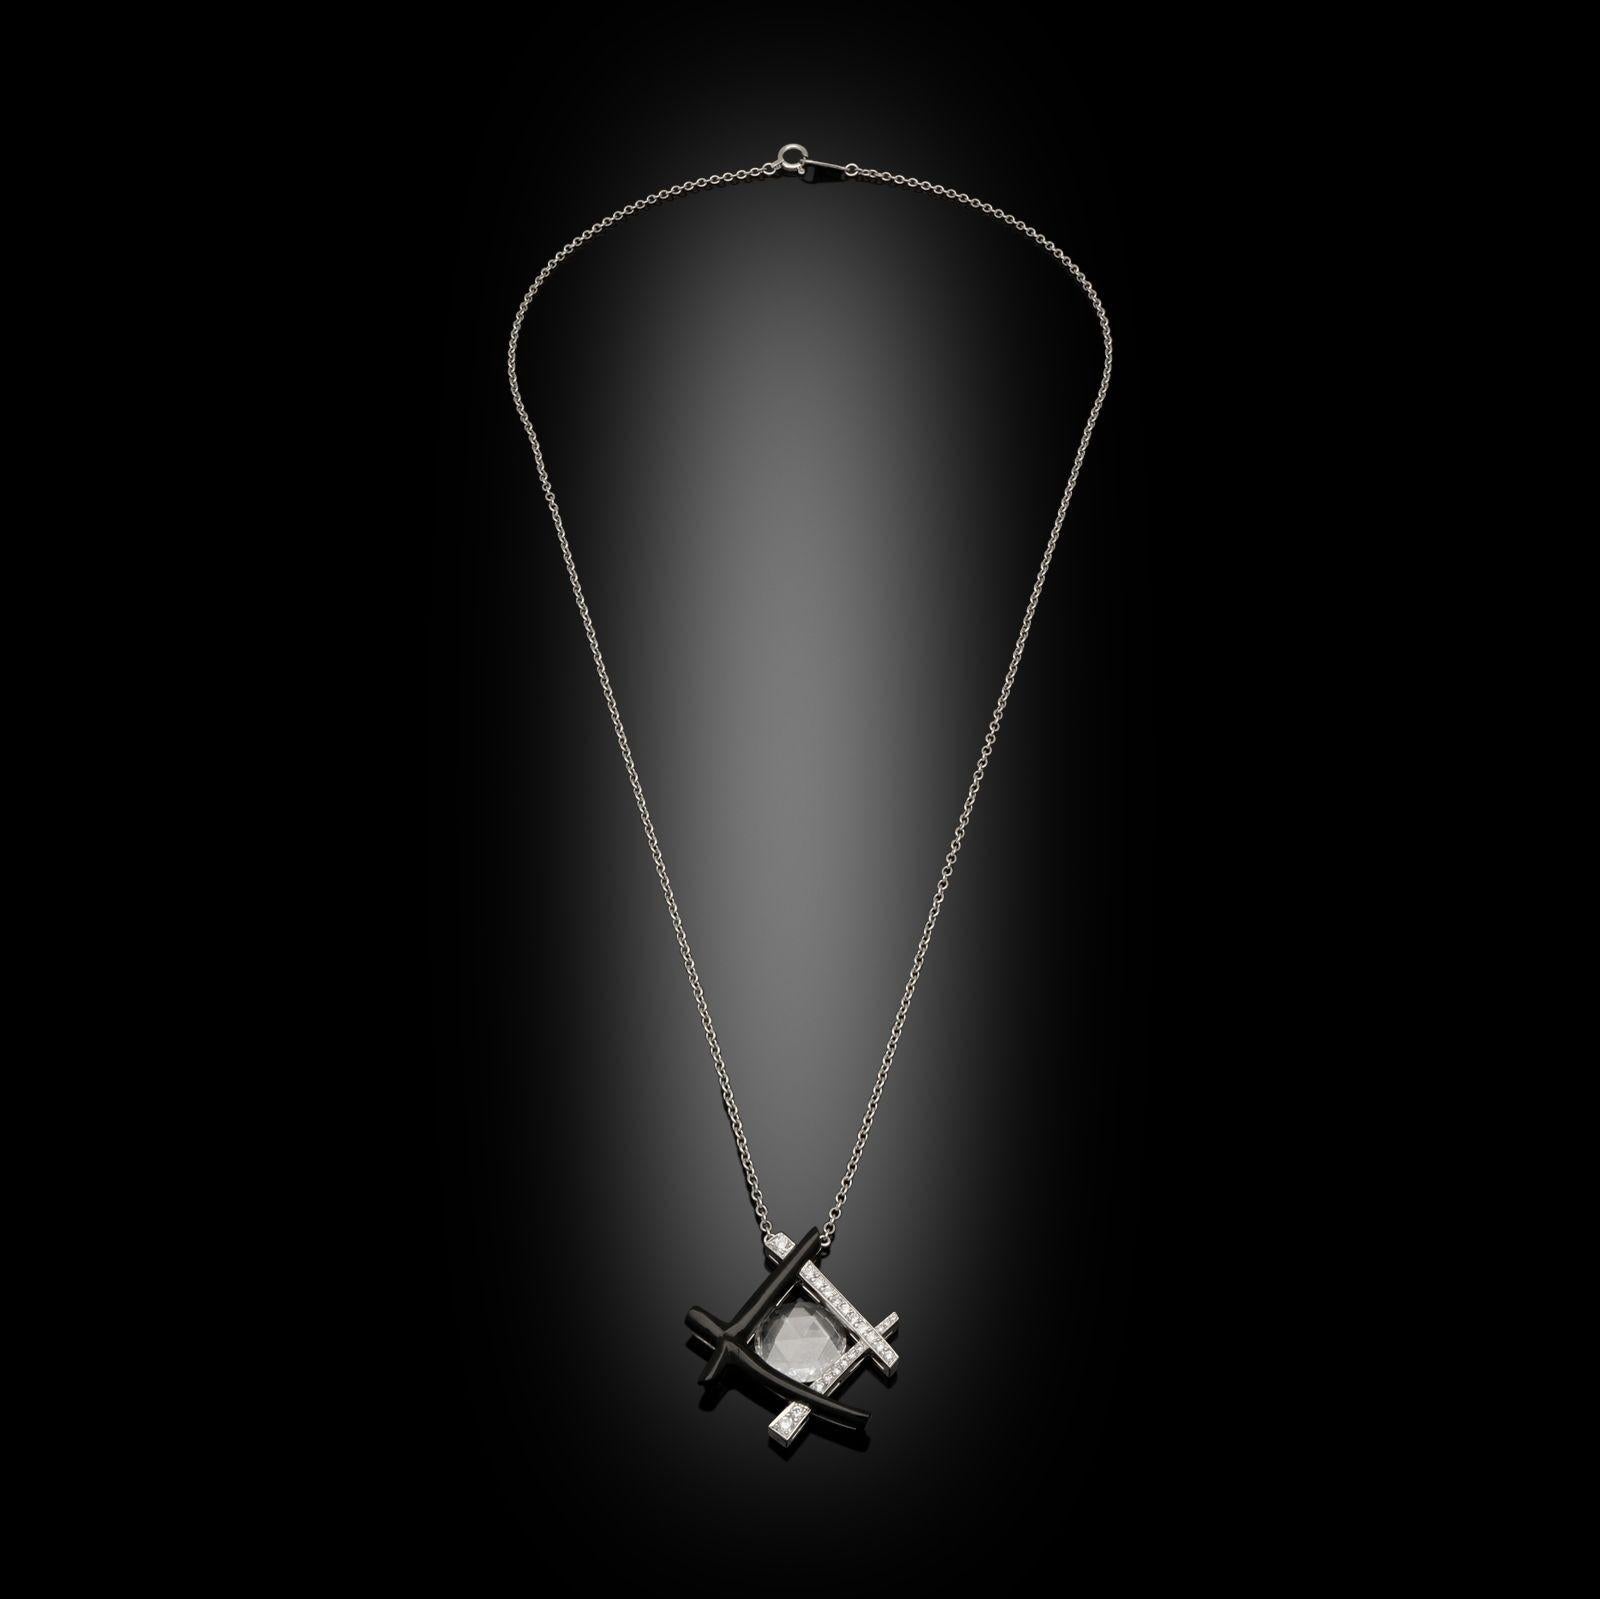 An unusual rose cut diamond pendant by Hancocks, set to the centre with a beautiful, high quality rose cut diamond weighing 1.12cts and of D colour and VVS2 clarity within an abstract geometric frame inspired by oriental bamboo motifs, two of the